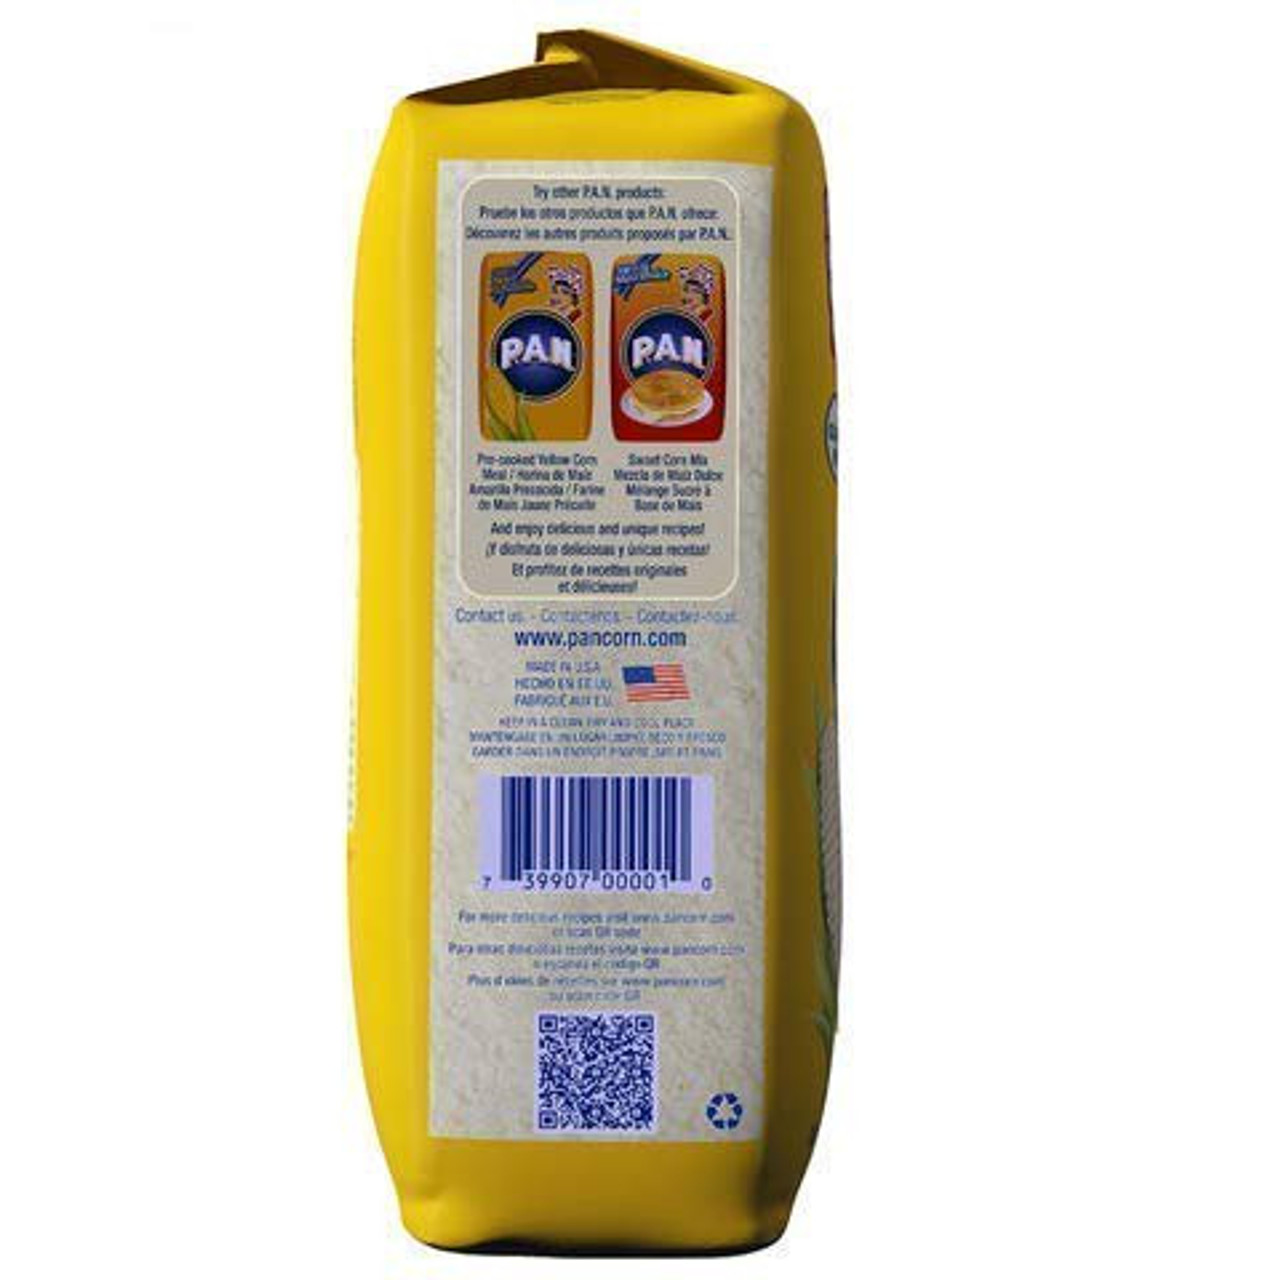 PAN White Corn Meal - Pre-cooked Gluten Free and Kosher Flour for Arepas, 1 Kg (10/CASE)